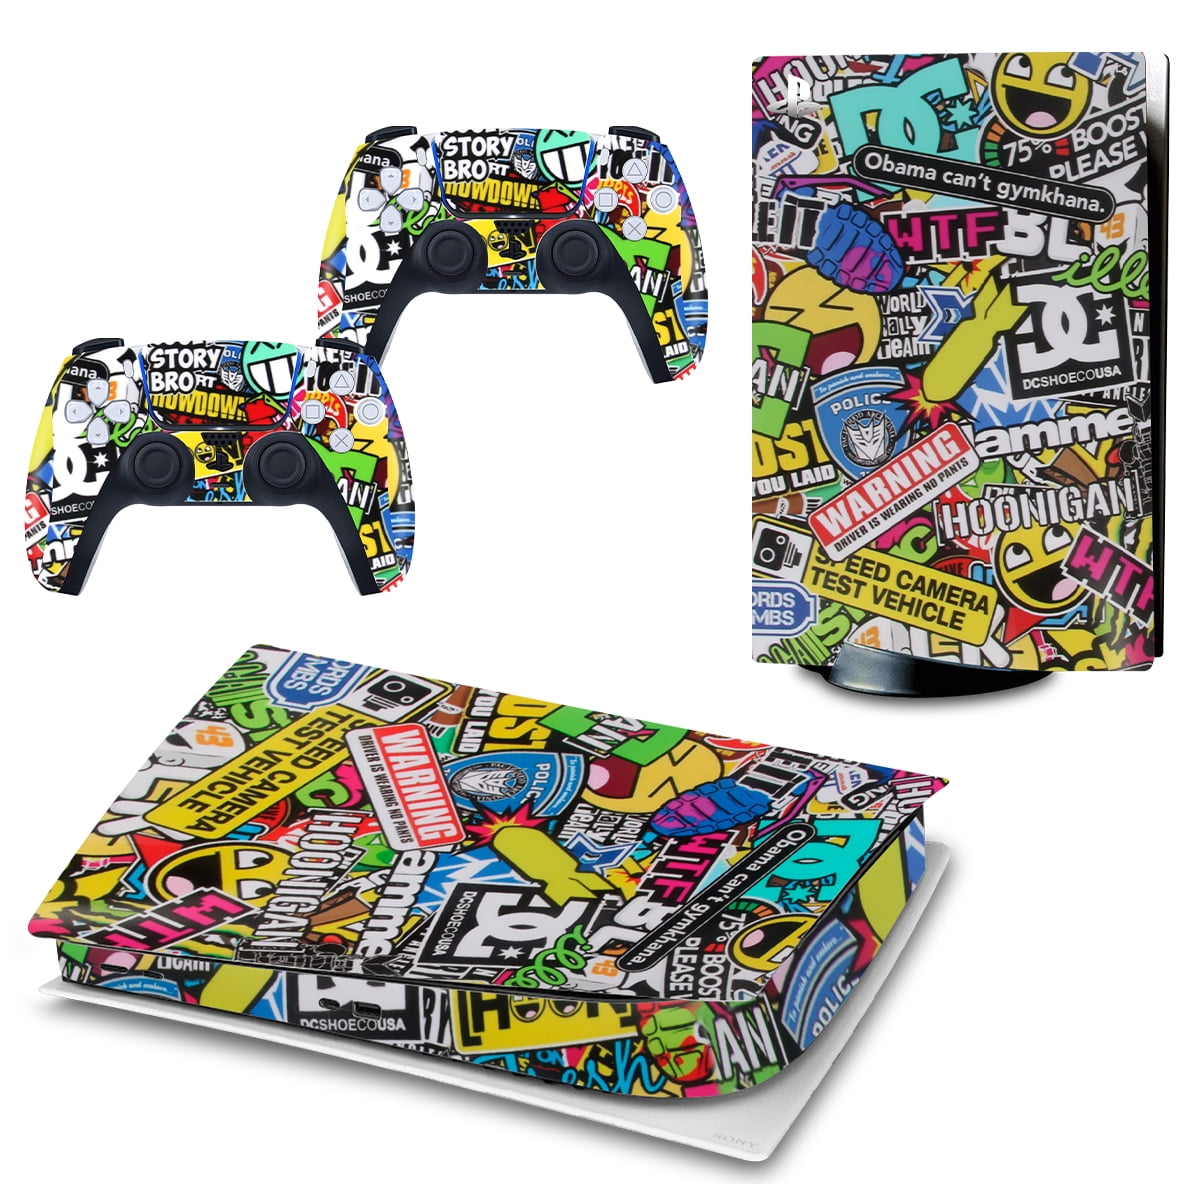 SKIN For PS5 Console and Controller Skin Sticker Vinyl Decal Stickers for  PS5 Console and Controllers,Skin Sticker for PS5 Disk Edition Football Theme